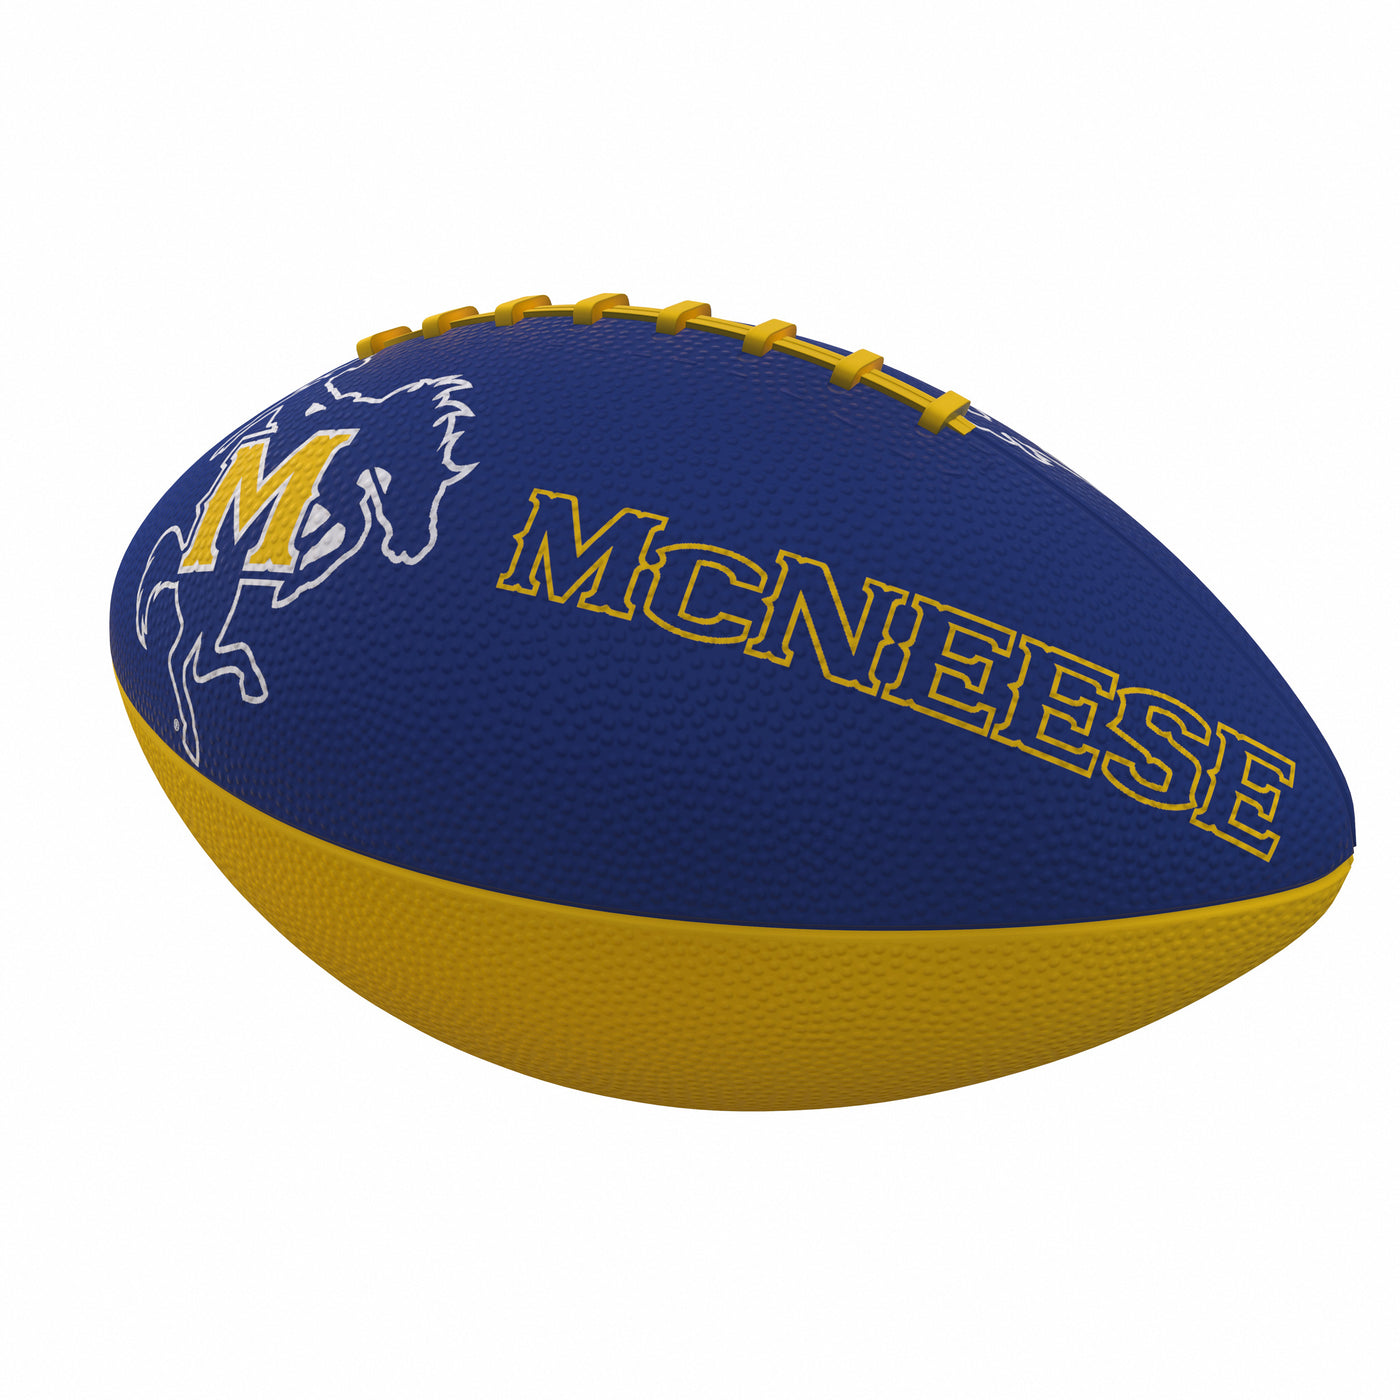 McNeese State Combo Logo Junior-Size Rubber Football